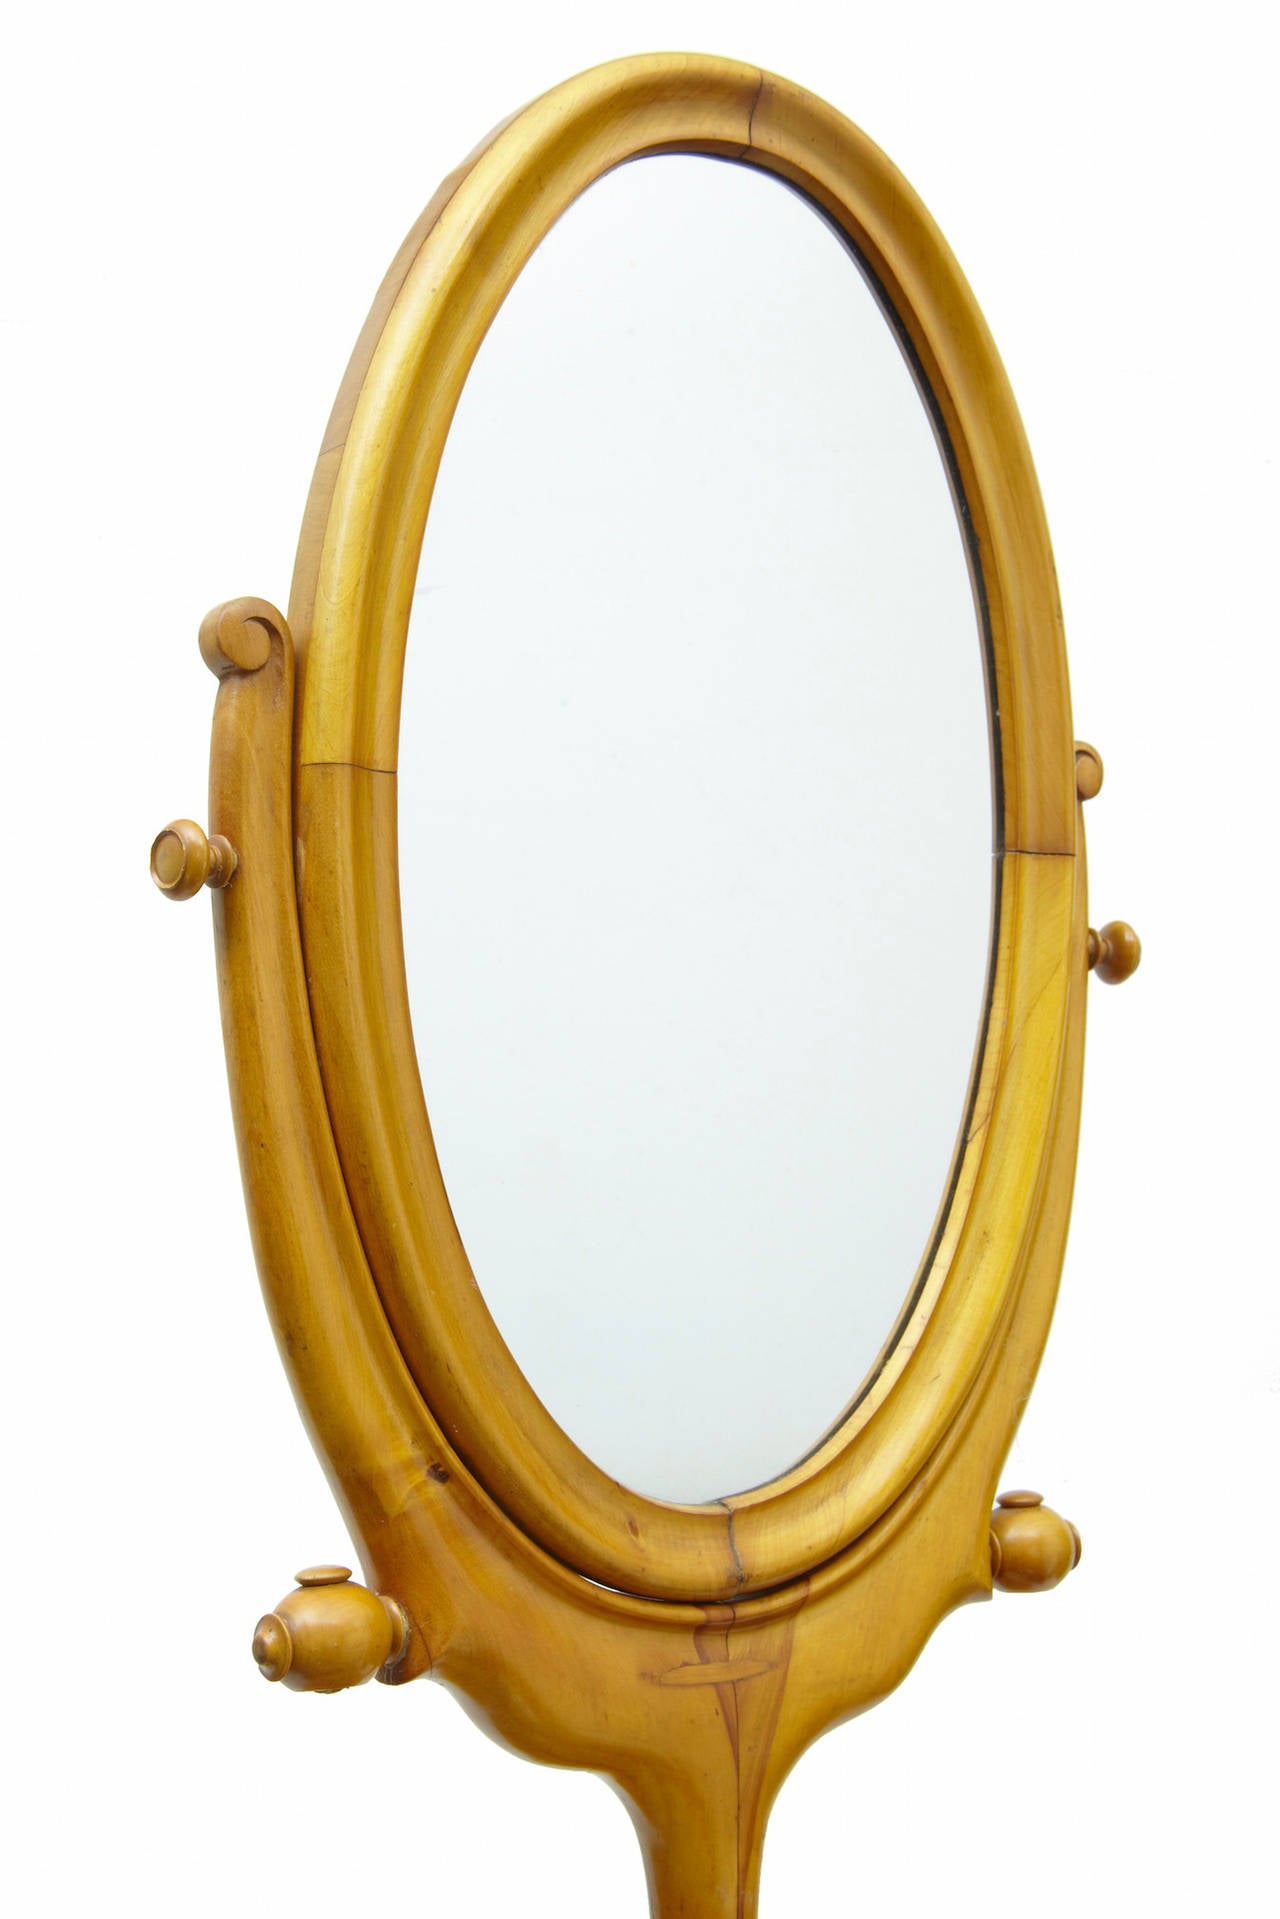 19th century birch gentleman's shaving mirror stand

Tilting mirror standing on circular tabletop with drawer, further turned base terminating on tripod legs.

circa 1880.

Measures: Height 64